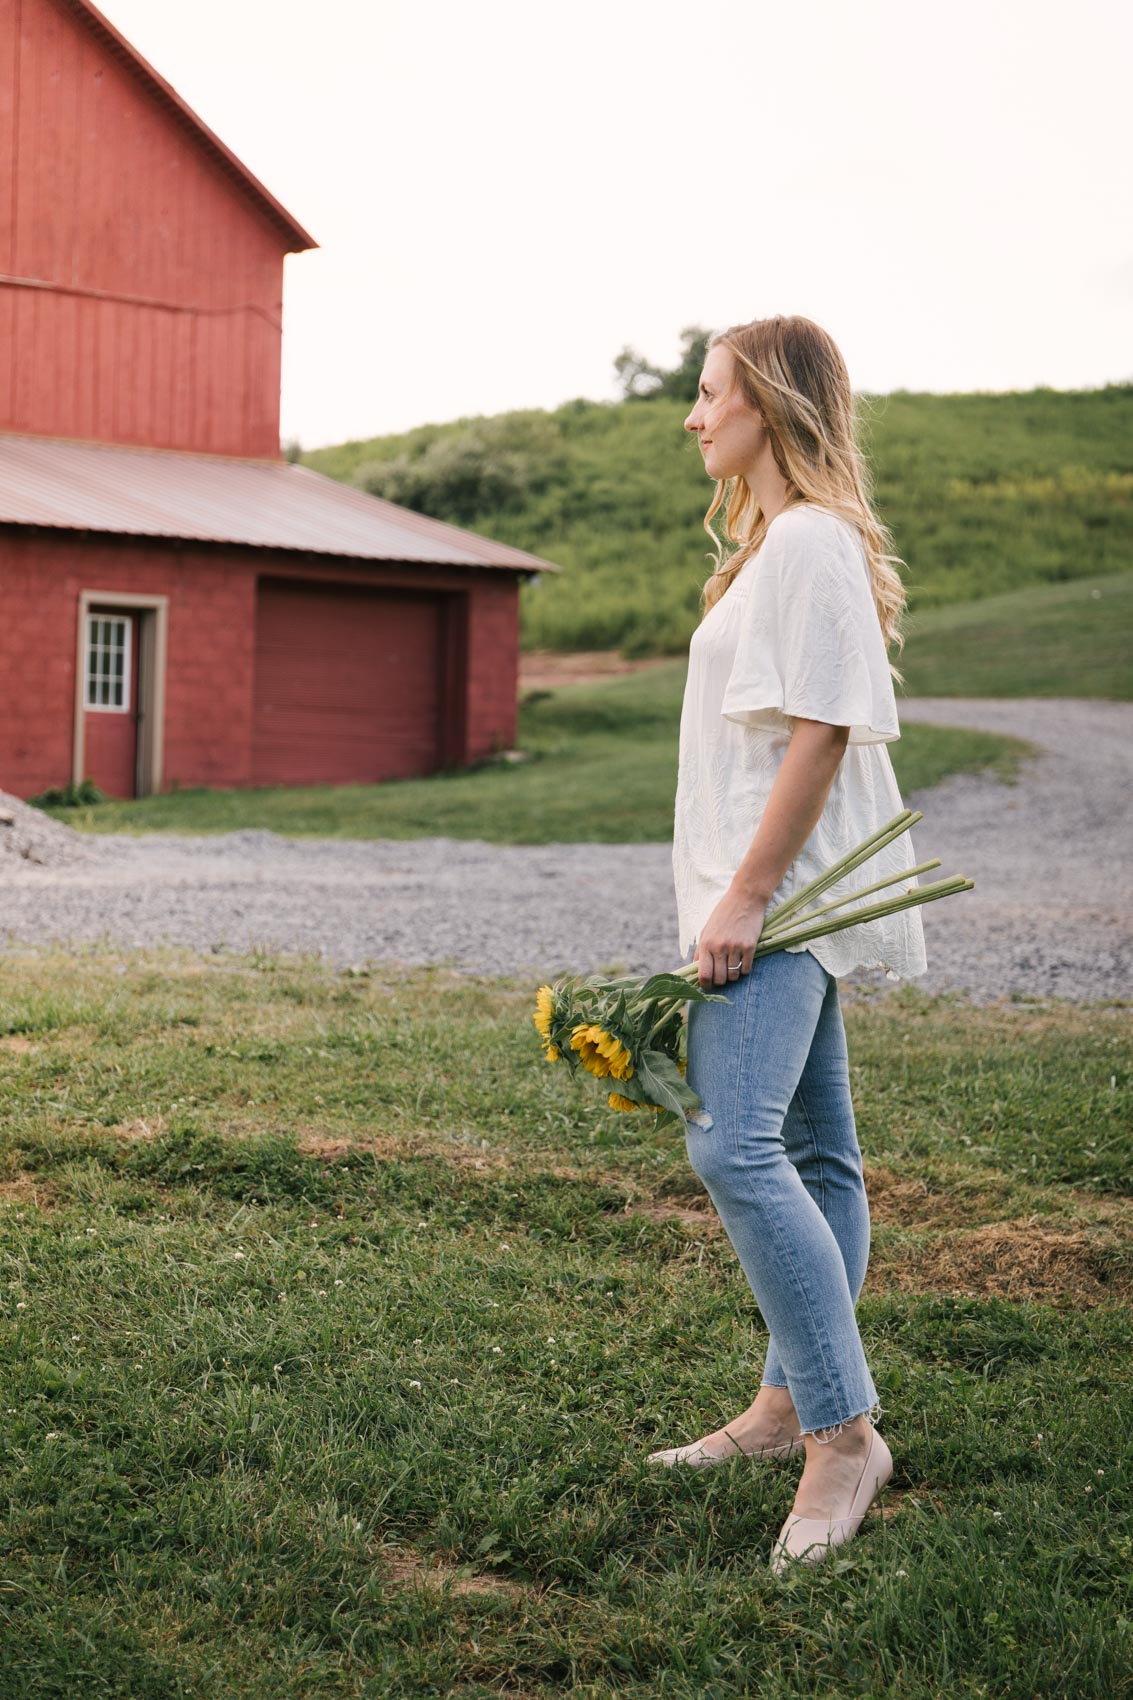 This Madewell Perfect Vintage jean outfit is ideal for embracing summer to fall style 2020 featuring a flowy white top and simple blush flats styled by Allyn Lewis at Red Barn Inn. #falloutfits #denimstyle #denimoutfit